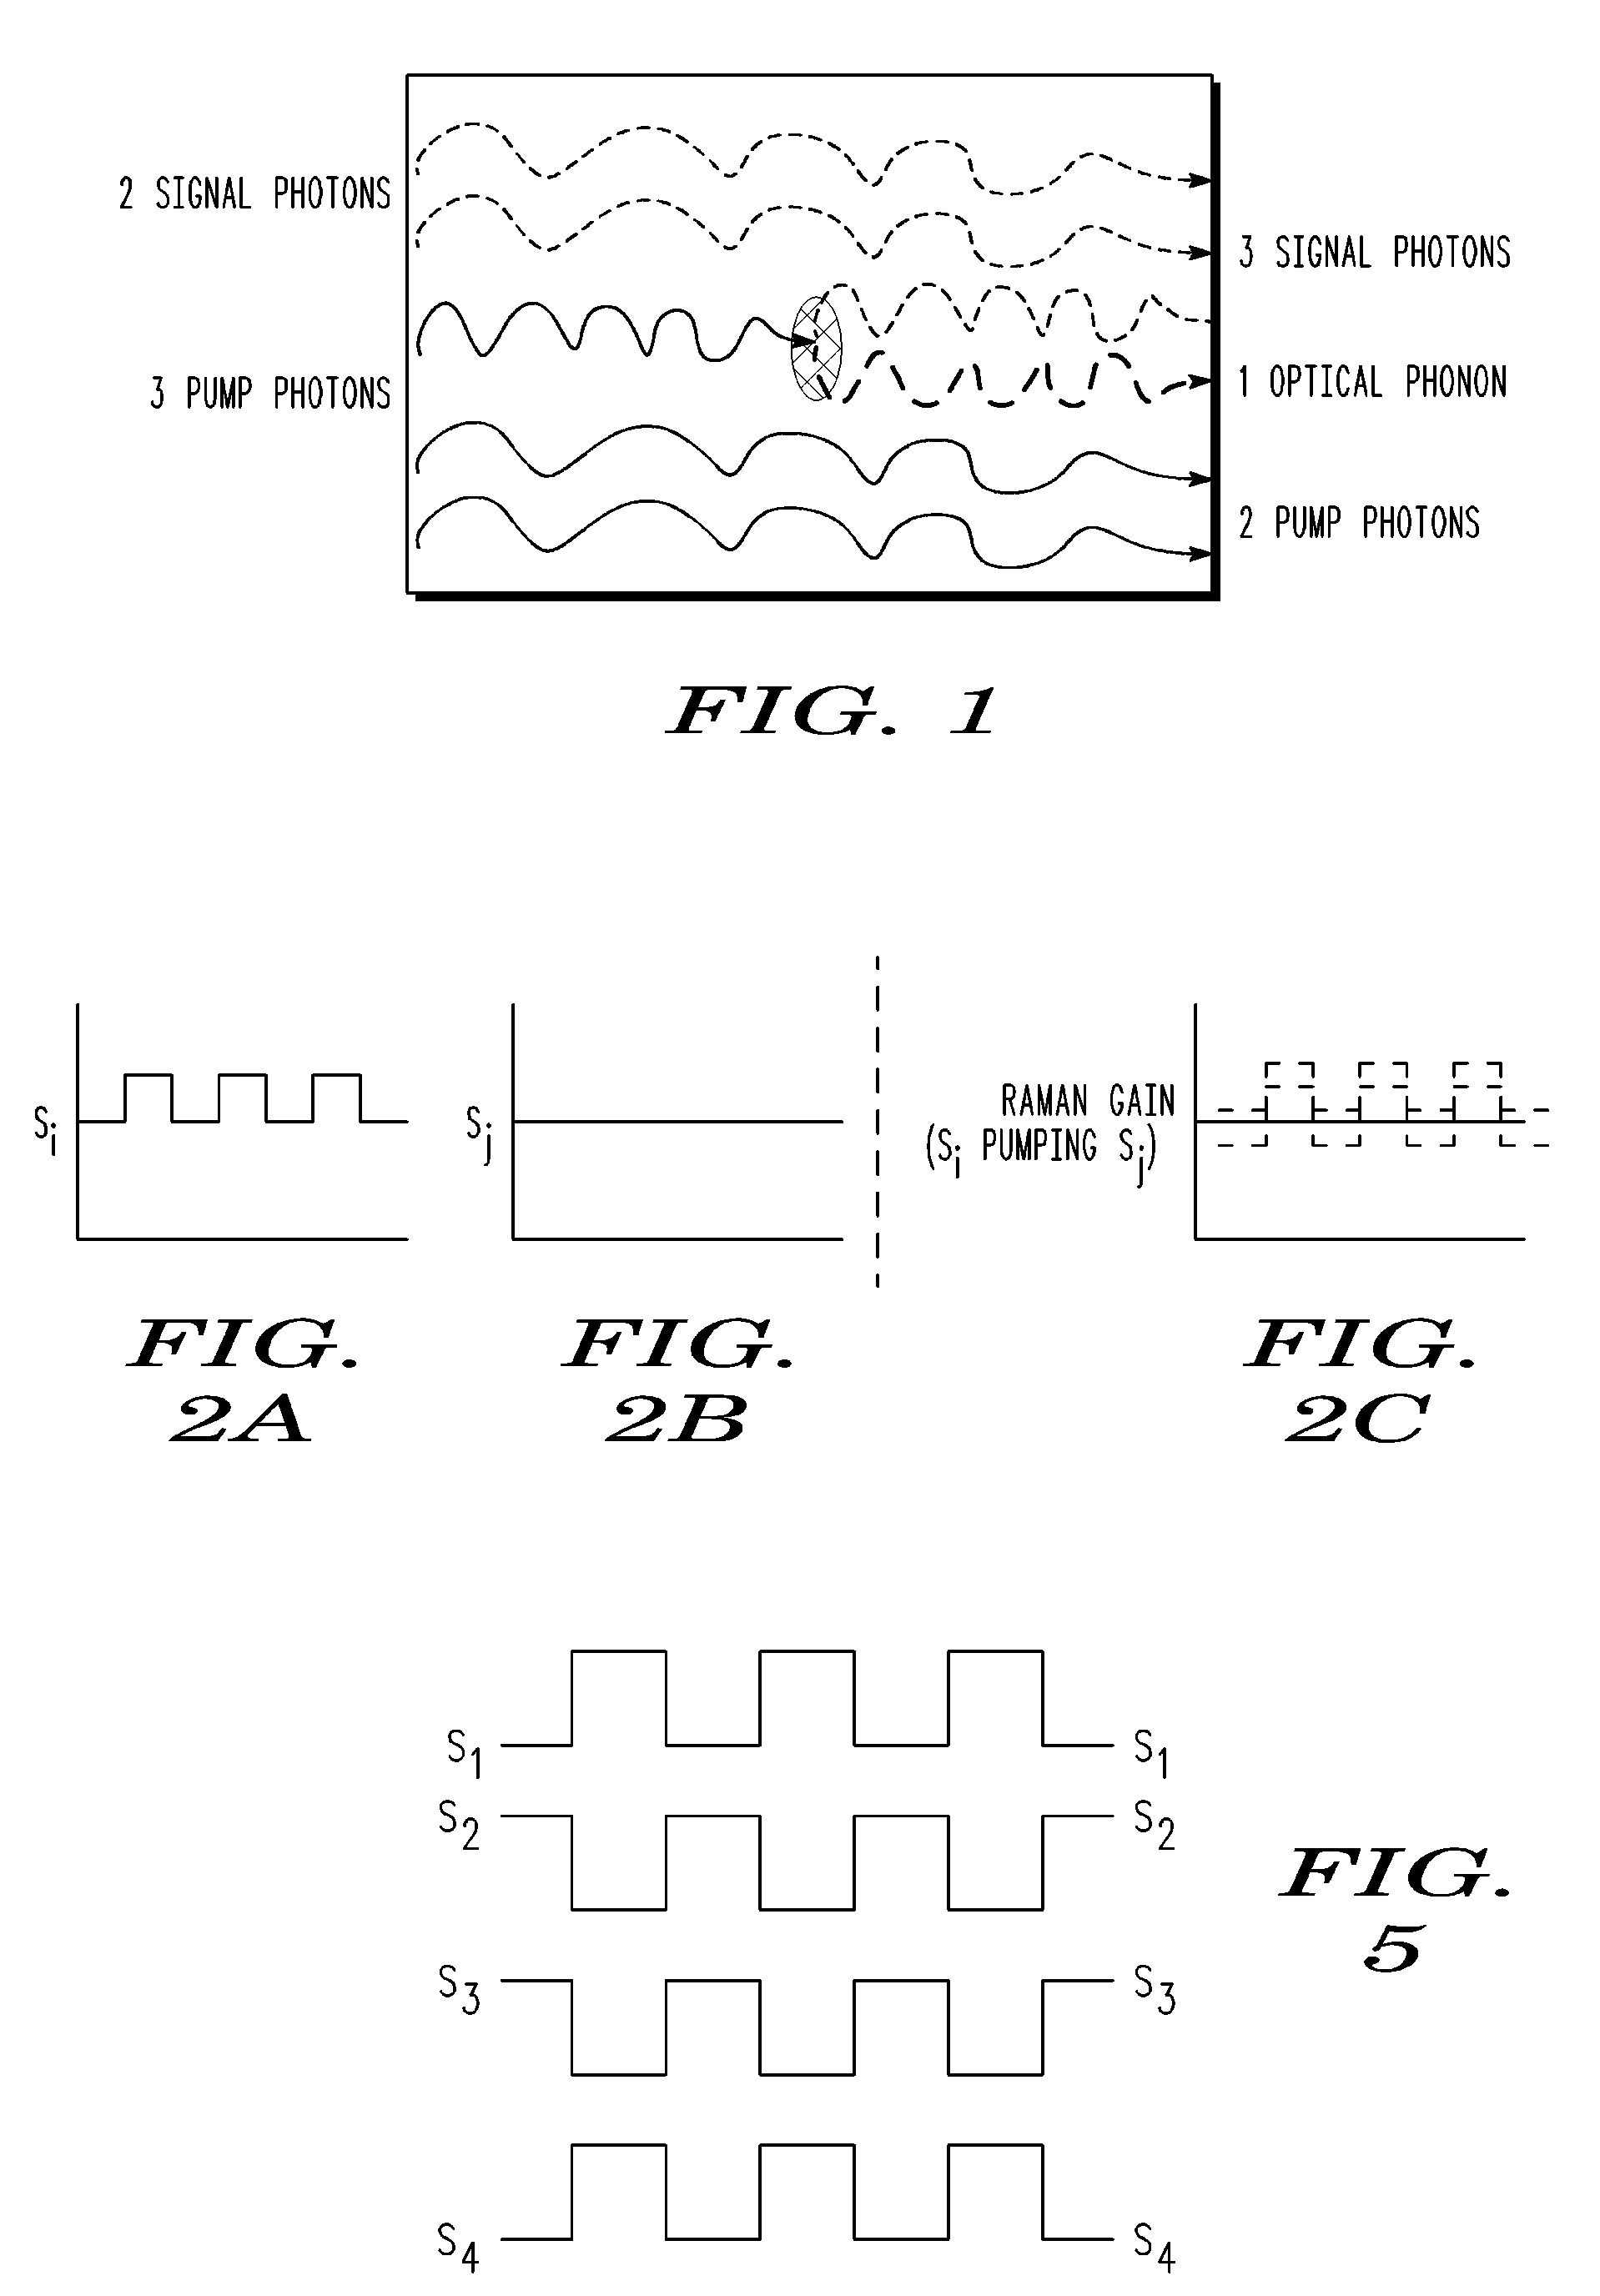 Method and apparatus for reducing crosstalk and nonlinear distortions induced by raman interactions in a wavelength division mulitplexed (WDM) optical communication system